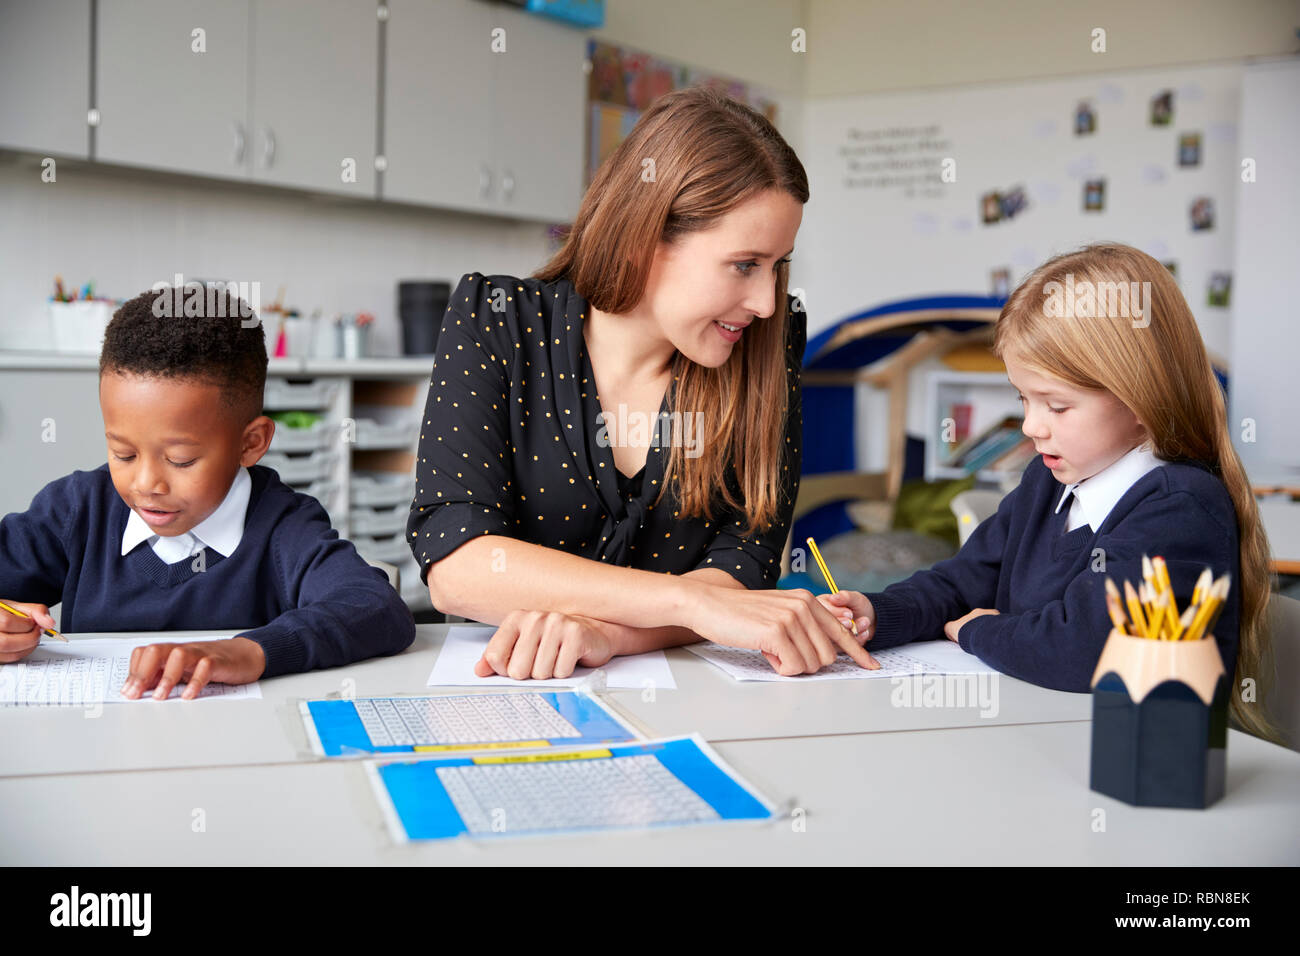 Female school teacher sitting between two primary school kids at a table in a classroom, helping a girl with her work, close up Stock Photo